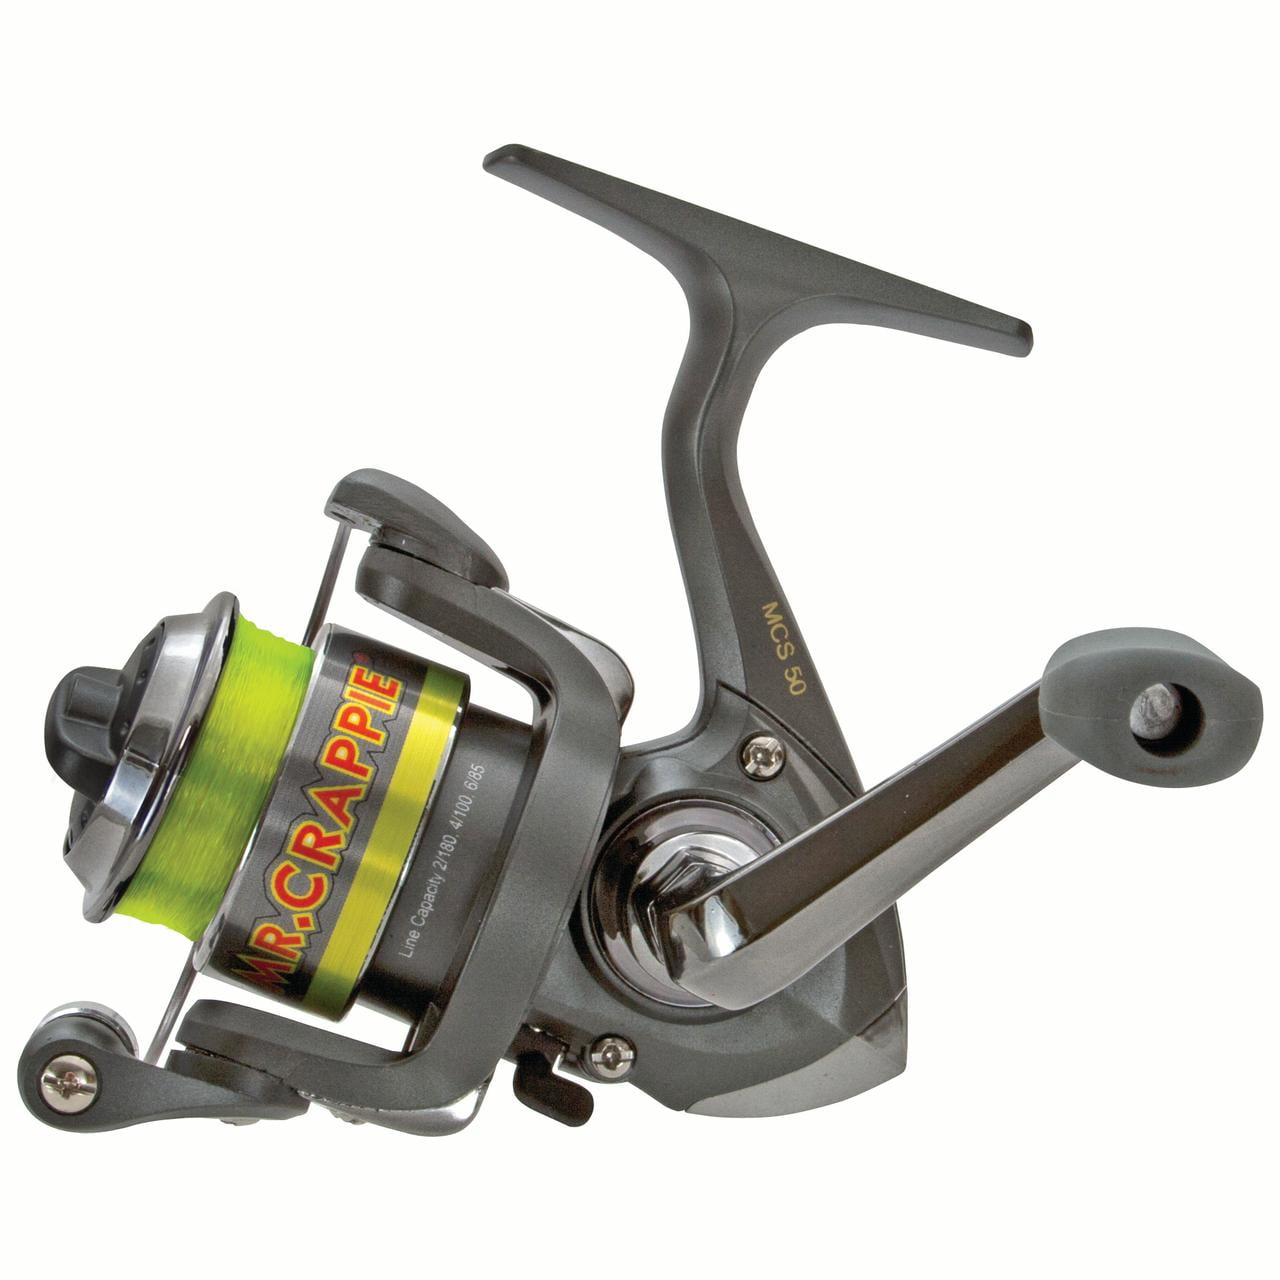 Mr Crappie by Lew's Slab Shaker Spinning Reel 